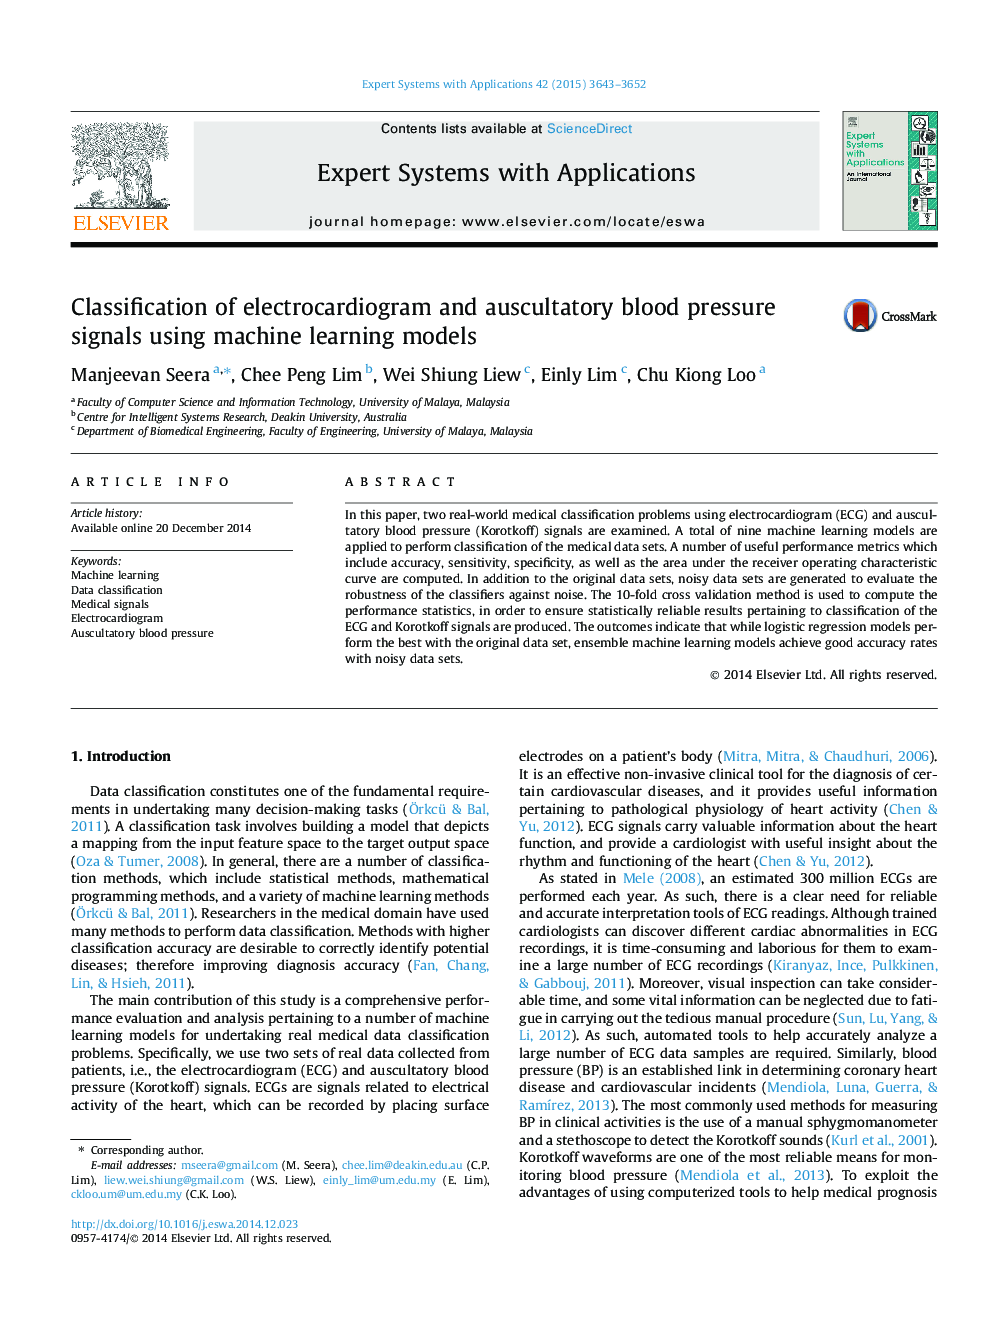 Classification of electrocardiogram and auscultatory blood pressure signals using machine learning models